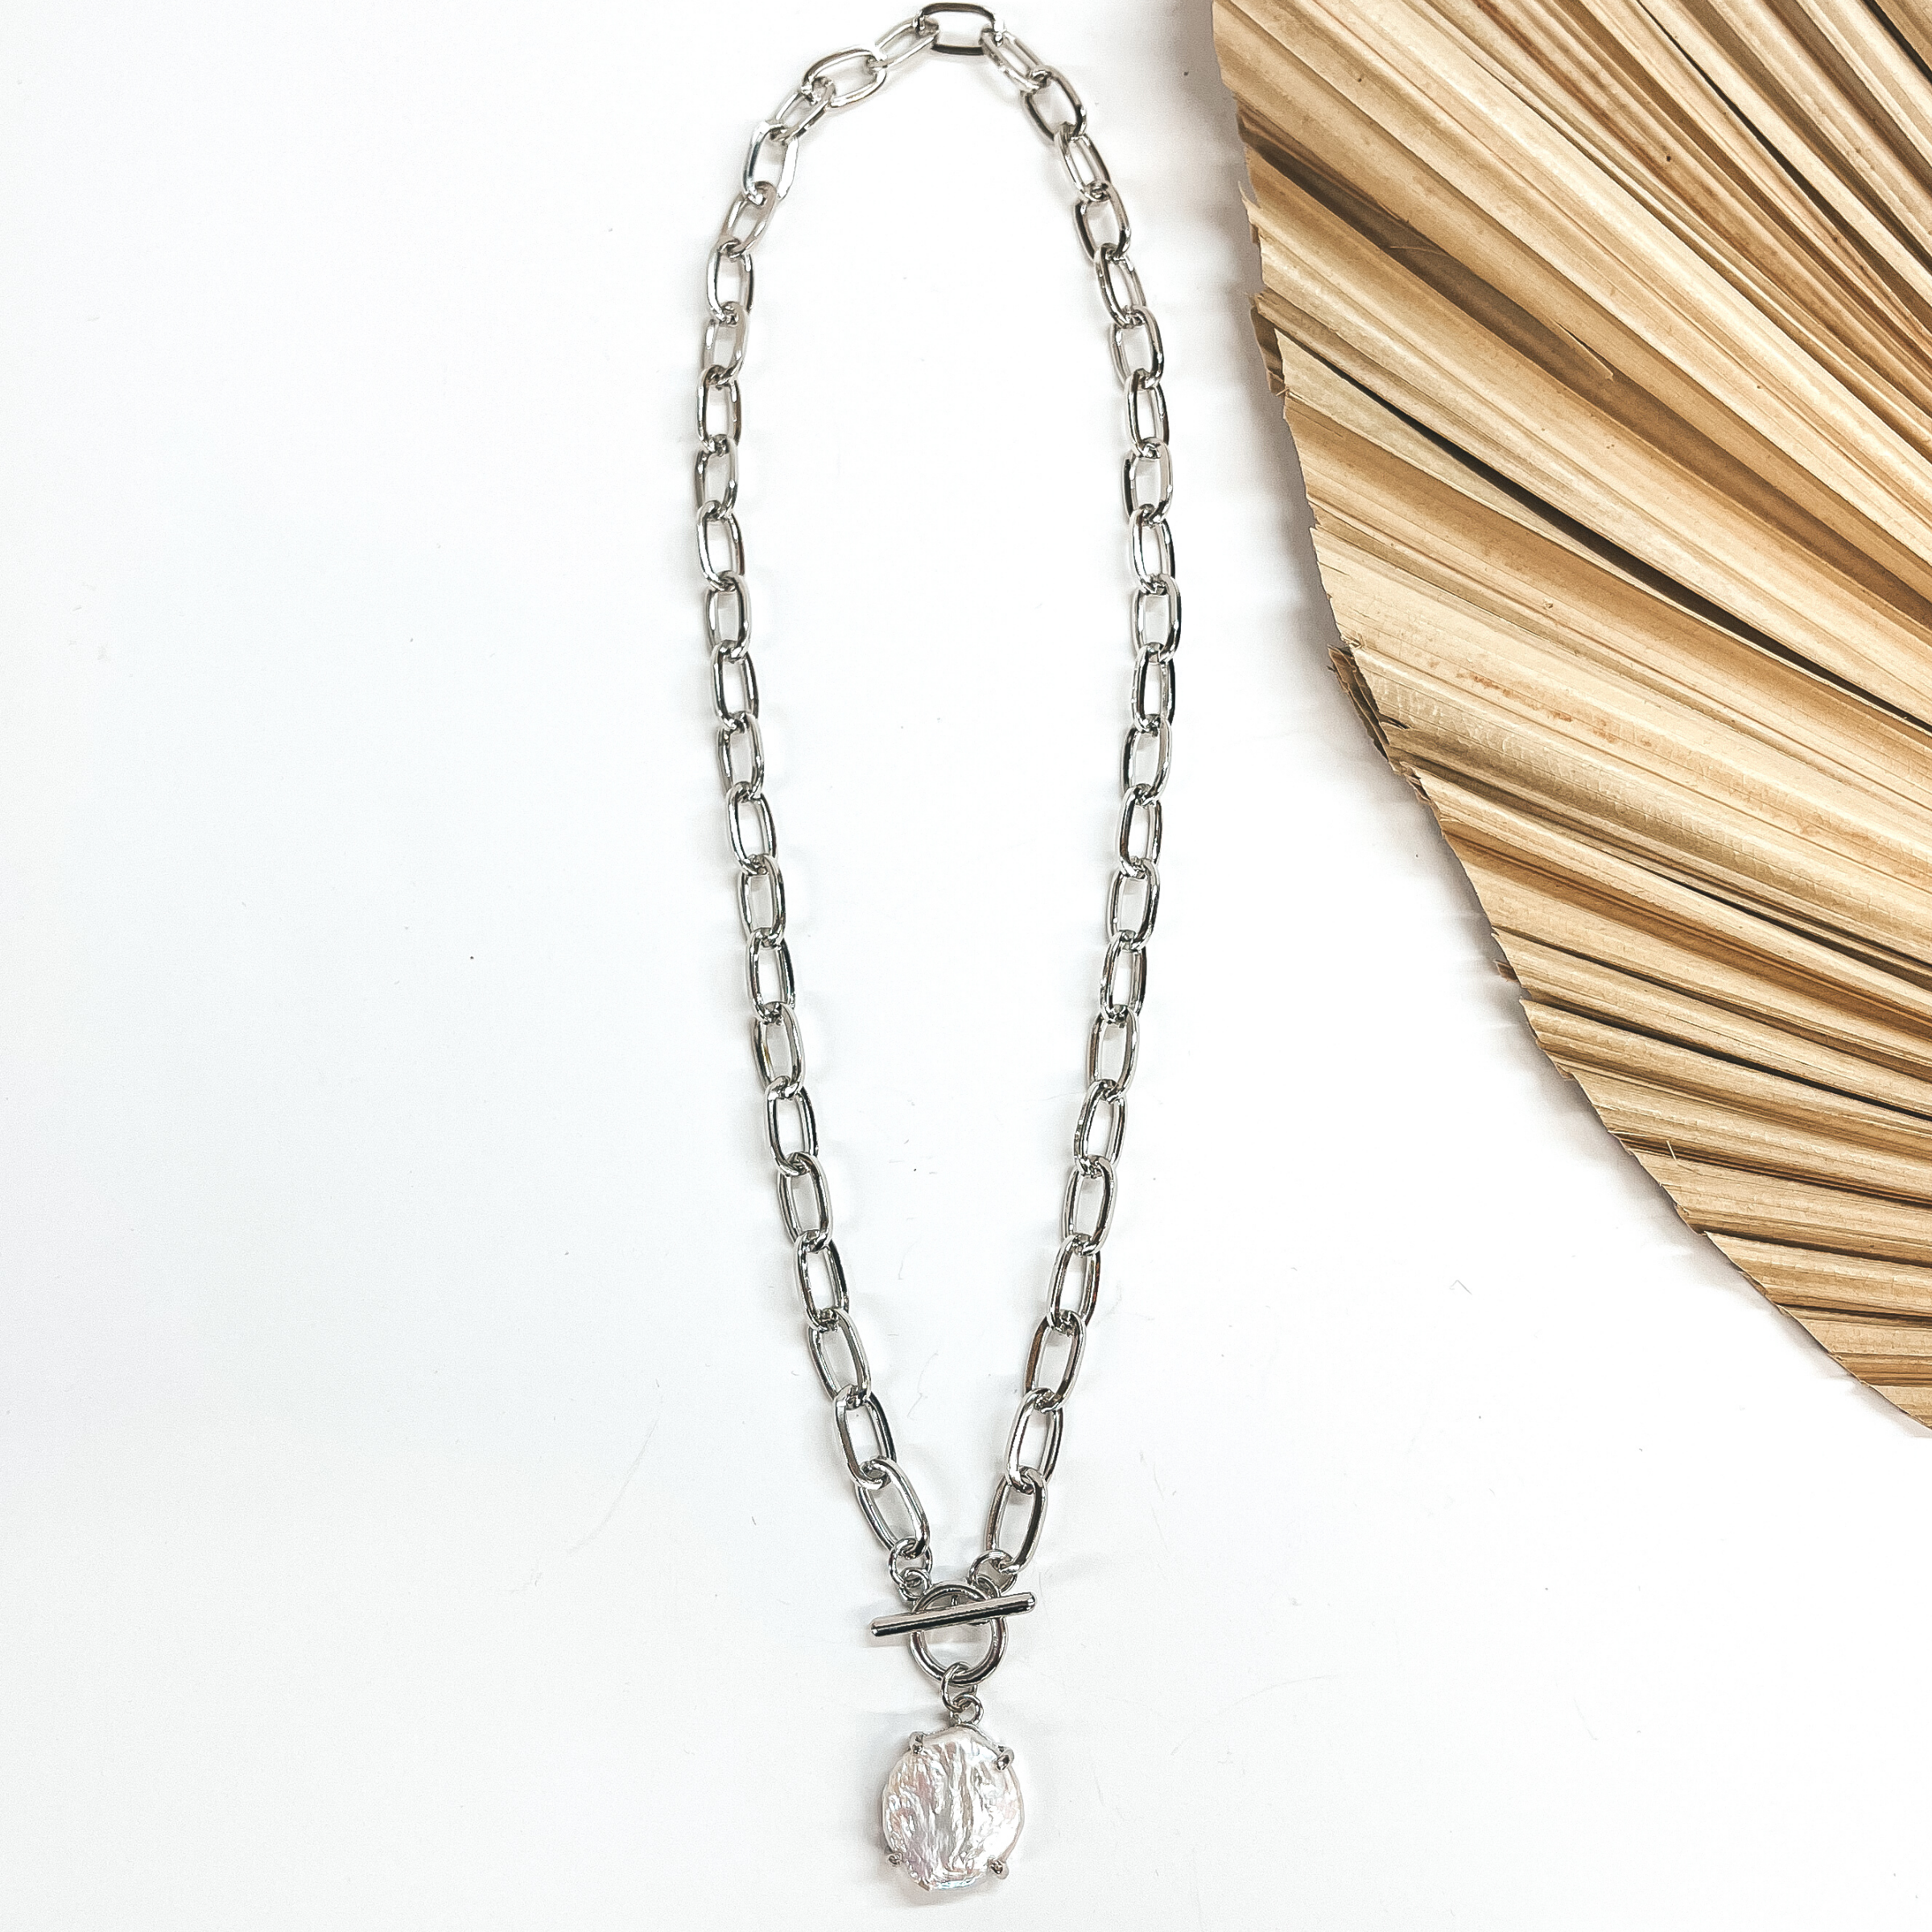 Silver thick chain with a toggle clasp and  freshwater pearl pendant. Taken on a white background and a dried up palm leaf in the side as decor.